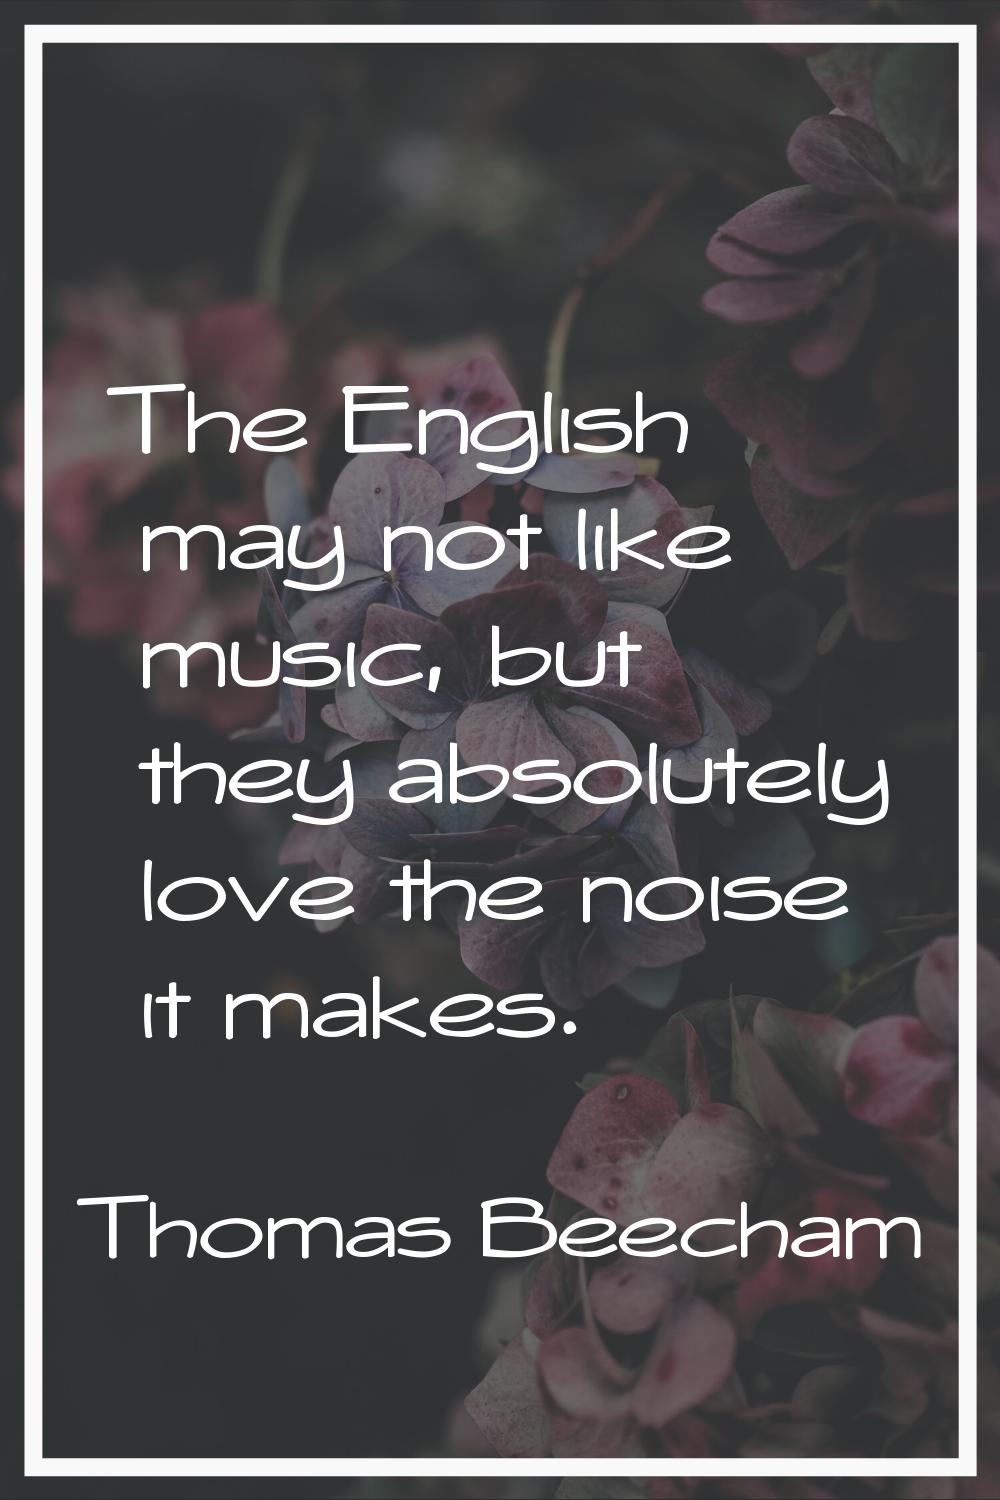 The English may not like music, but they absolutely love the noise it makes.